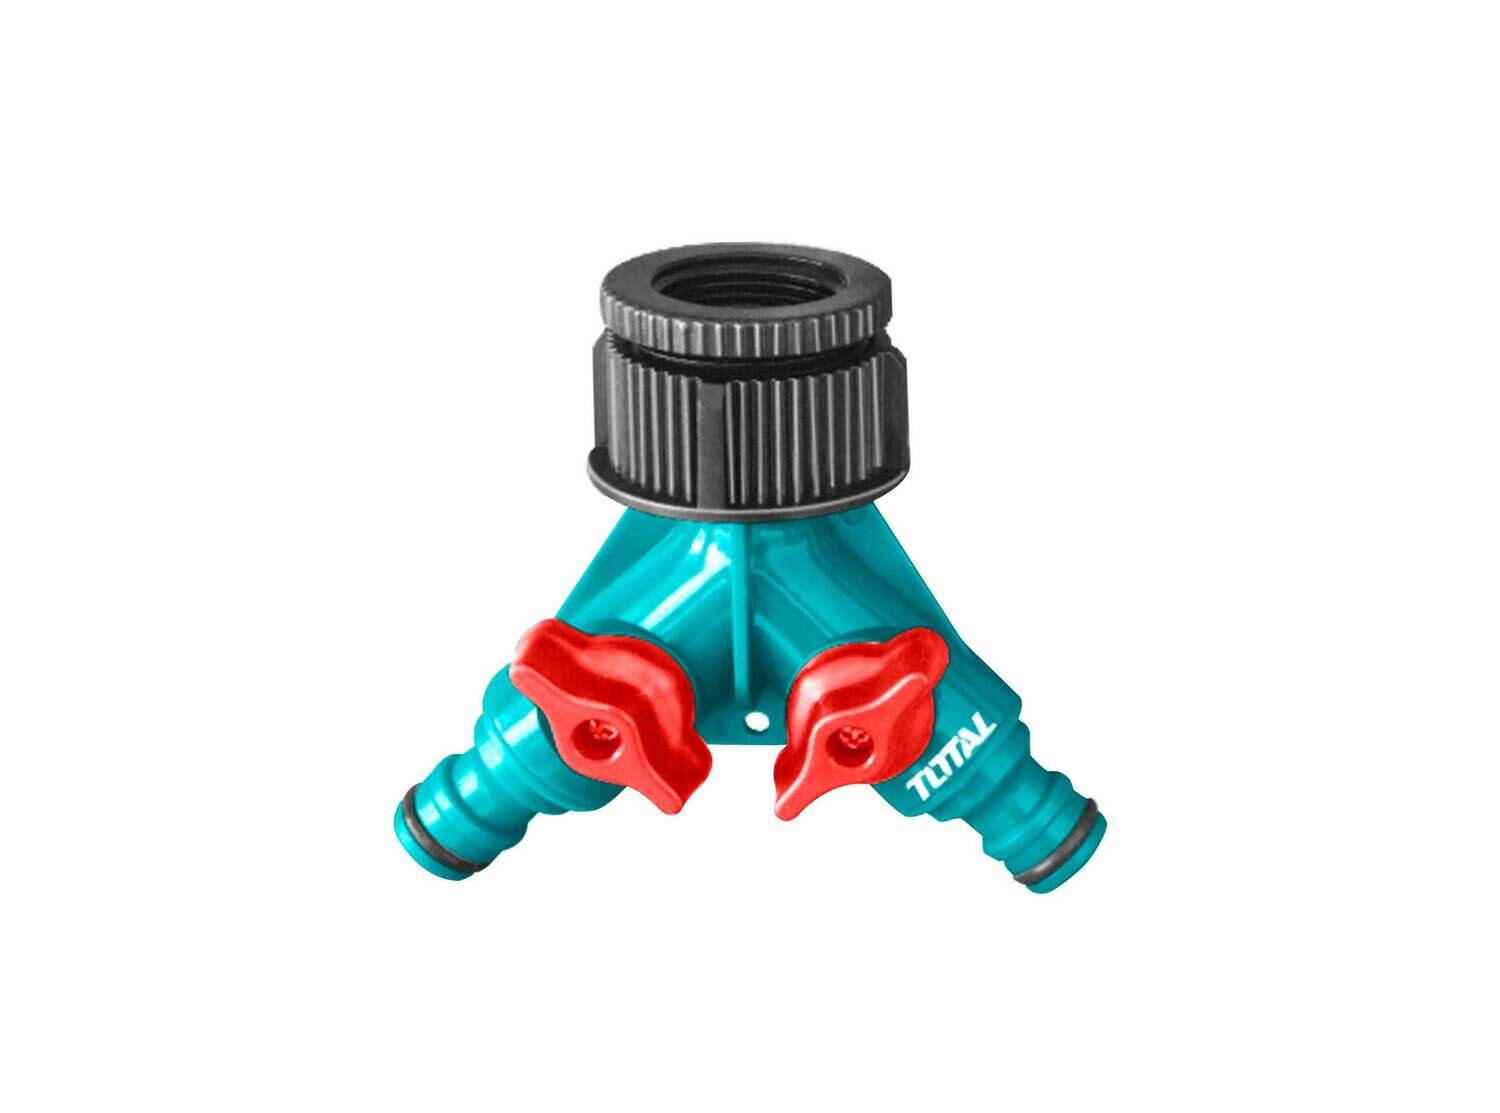 Total Plastic 2-Way Hose Connector: THHC1202